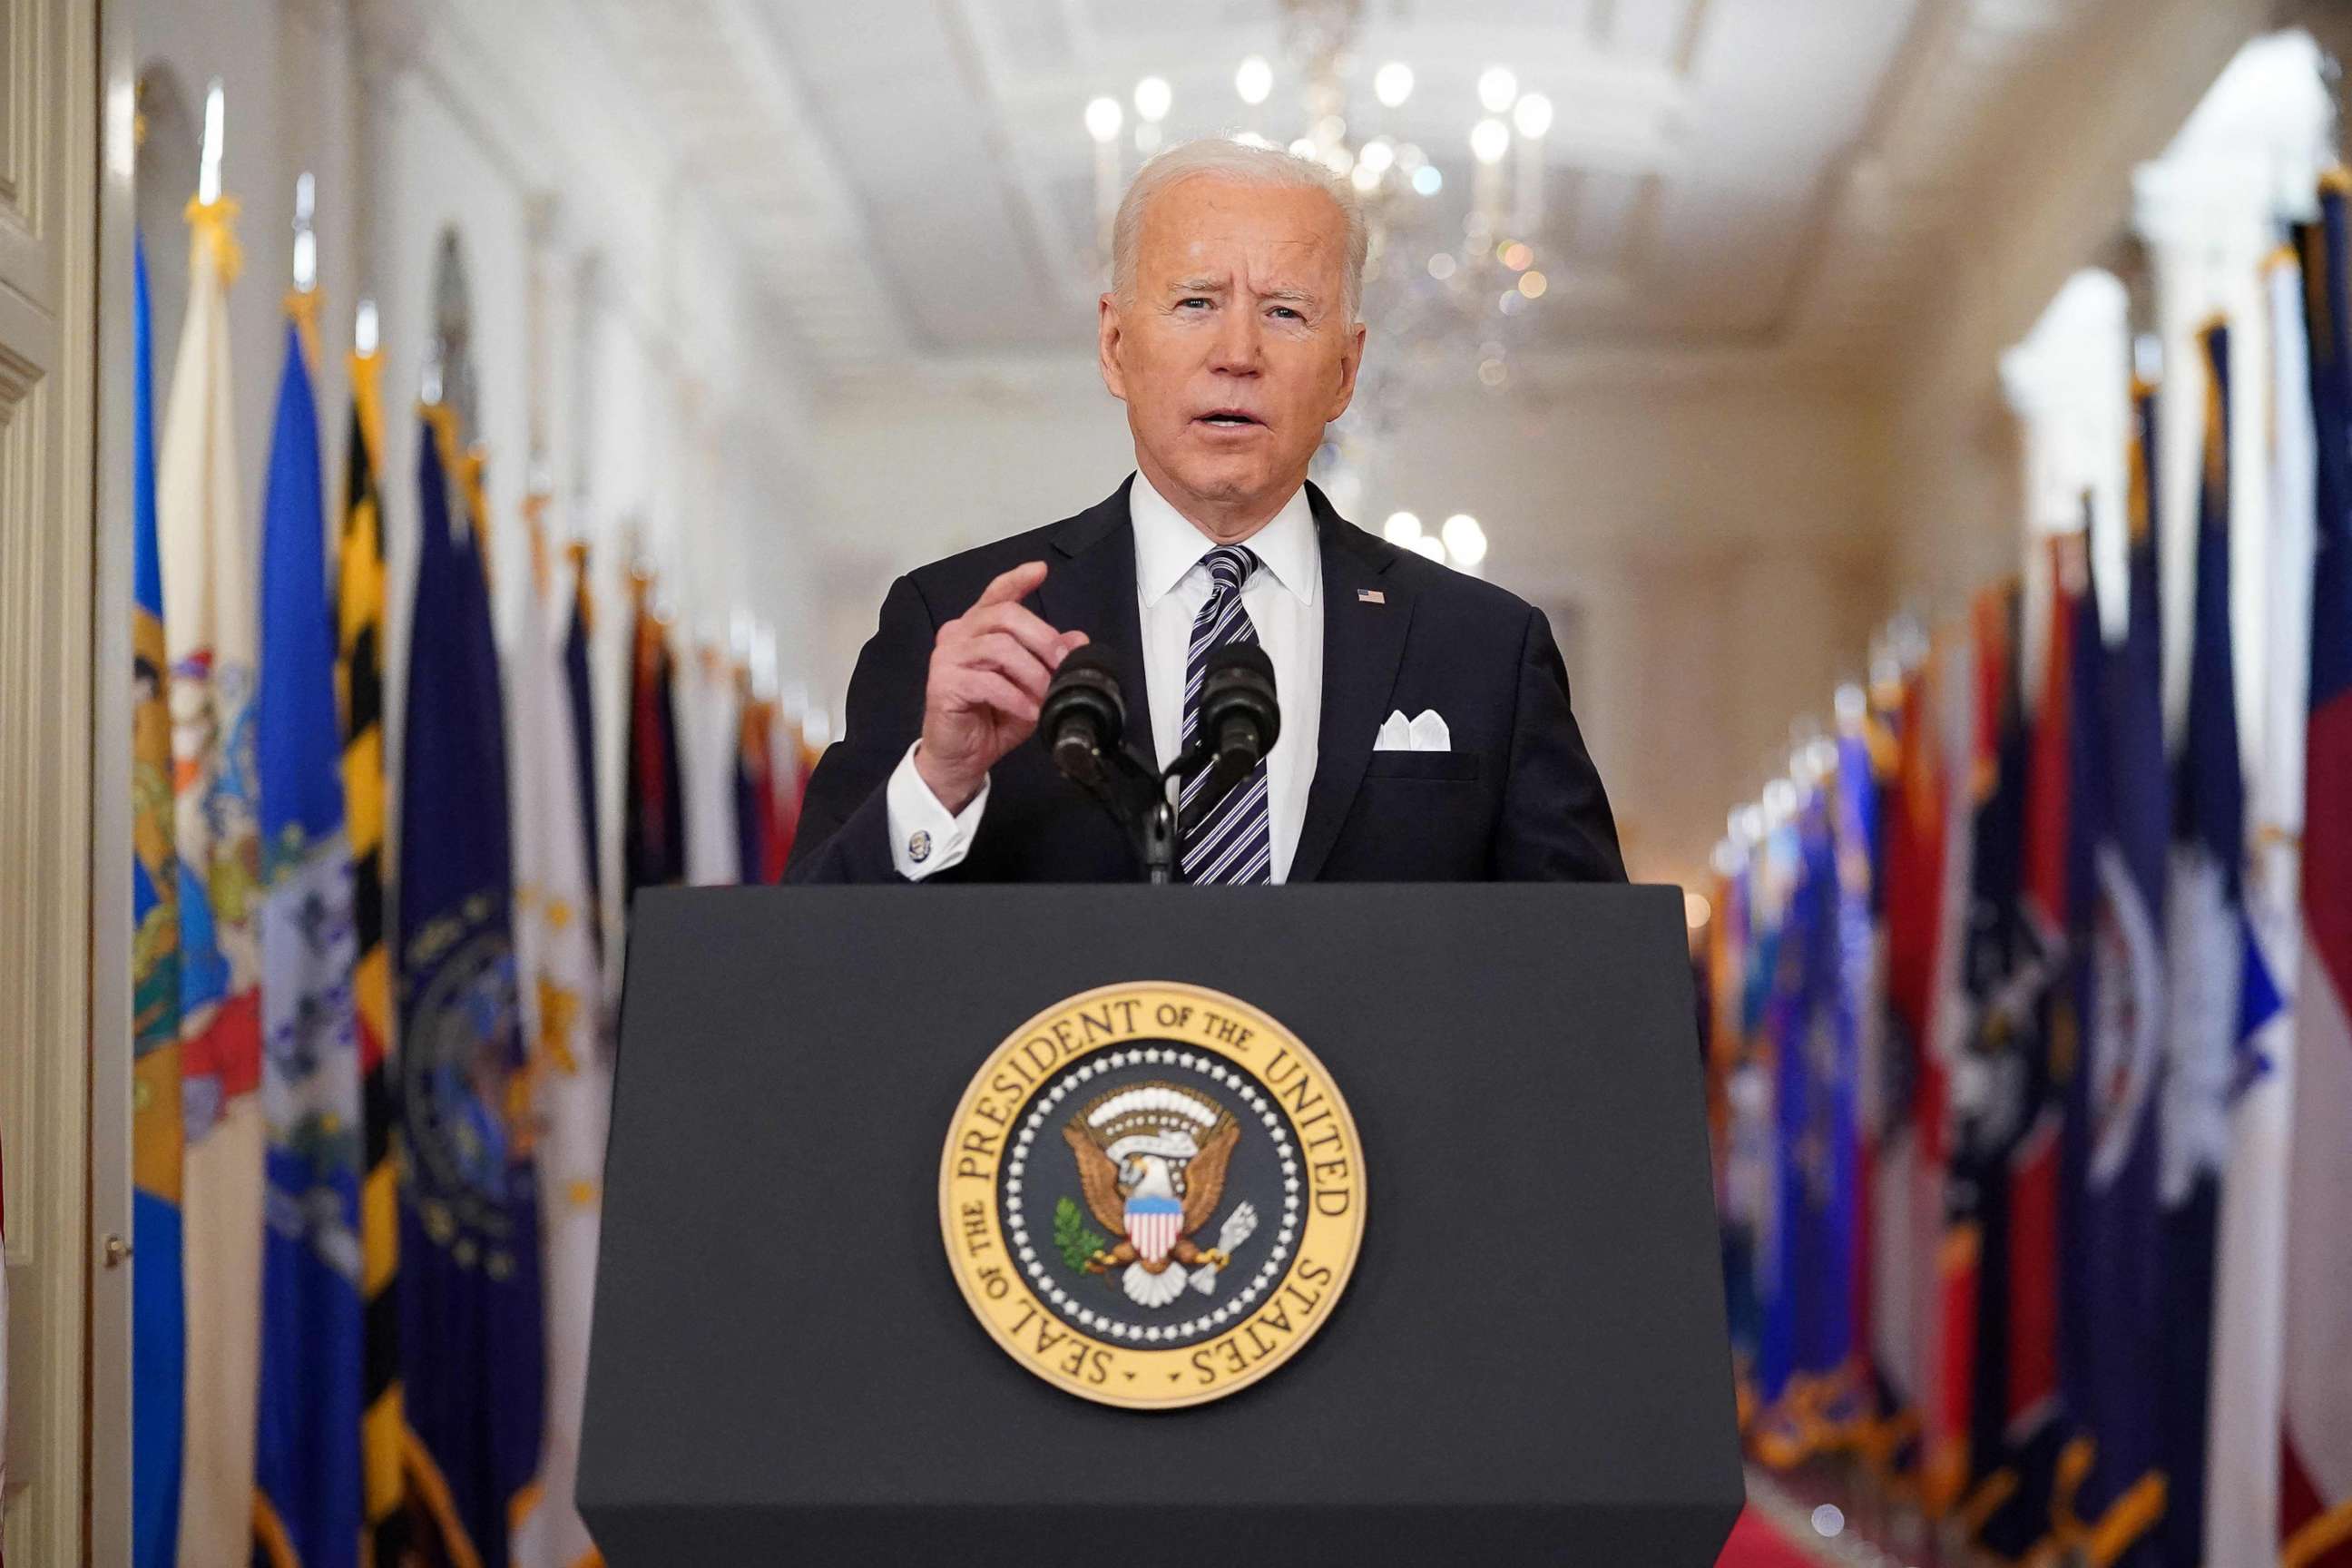 PHOTO: President Joe Biden speaks on the anniversary of the start of the Covid-19 pandemic, in the East Room of the White House in Washington, March 11, 2021.